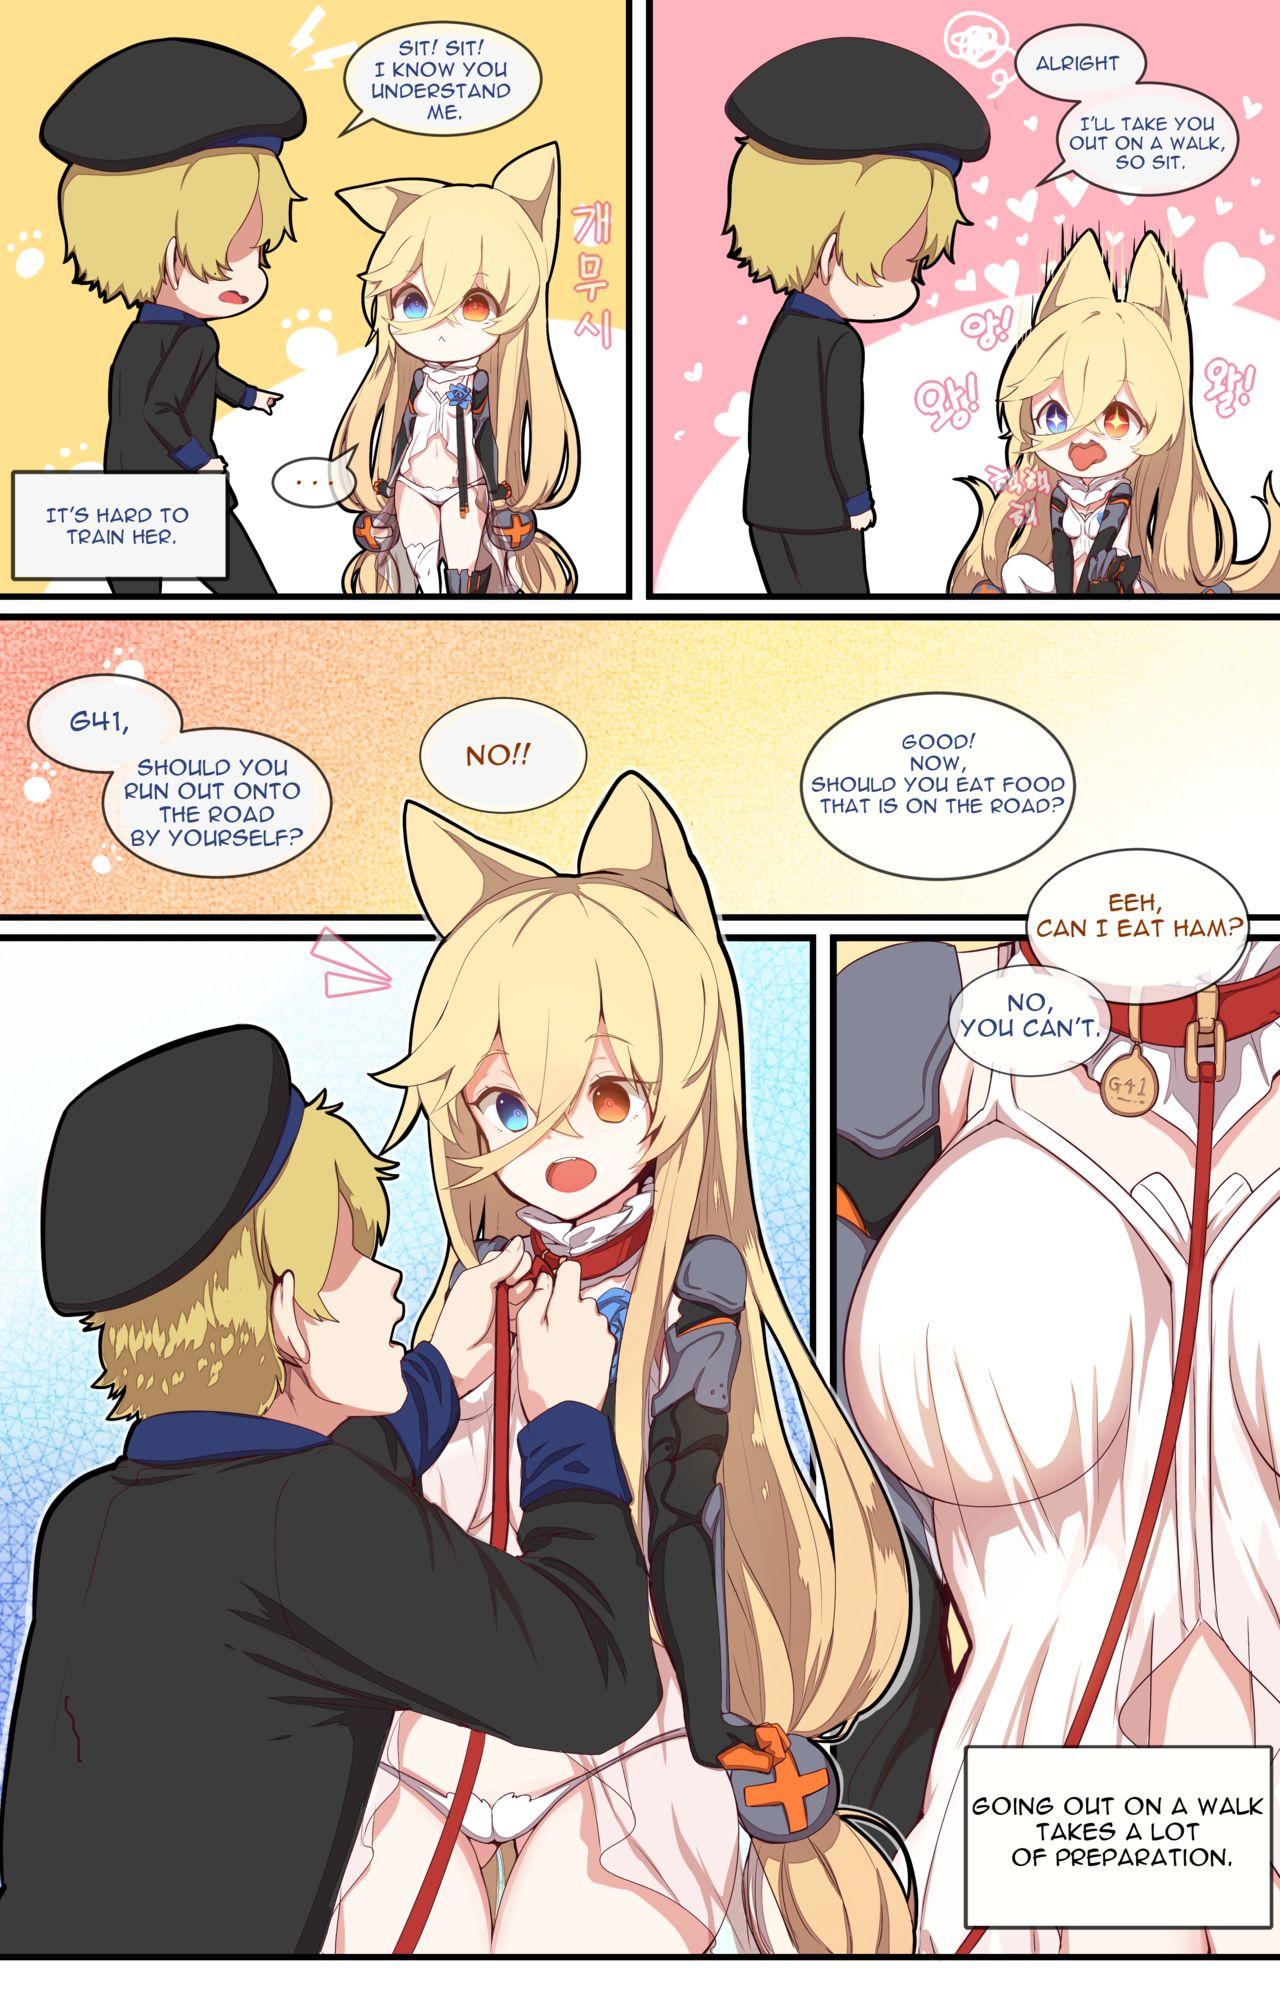 Hard How to Use Dolls 04 - Girls frontline Seduction - Page 3